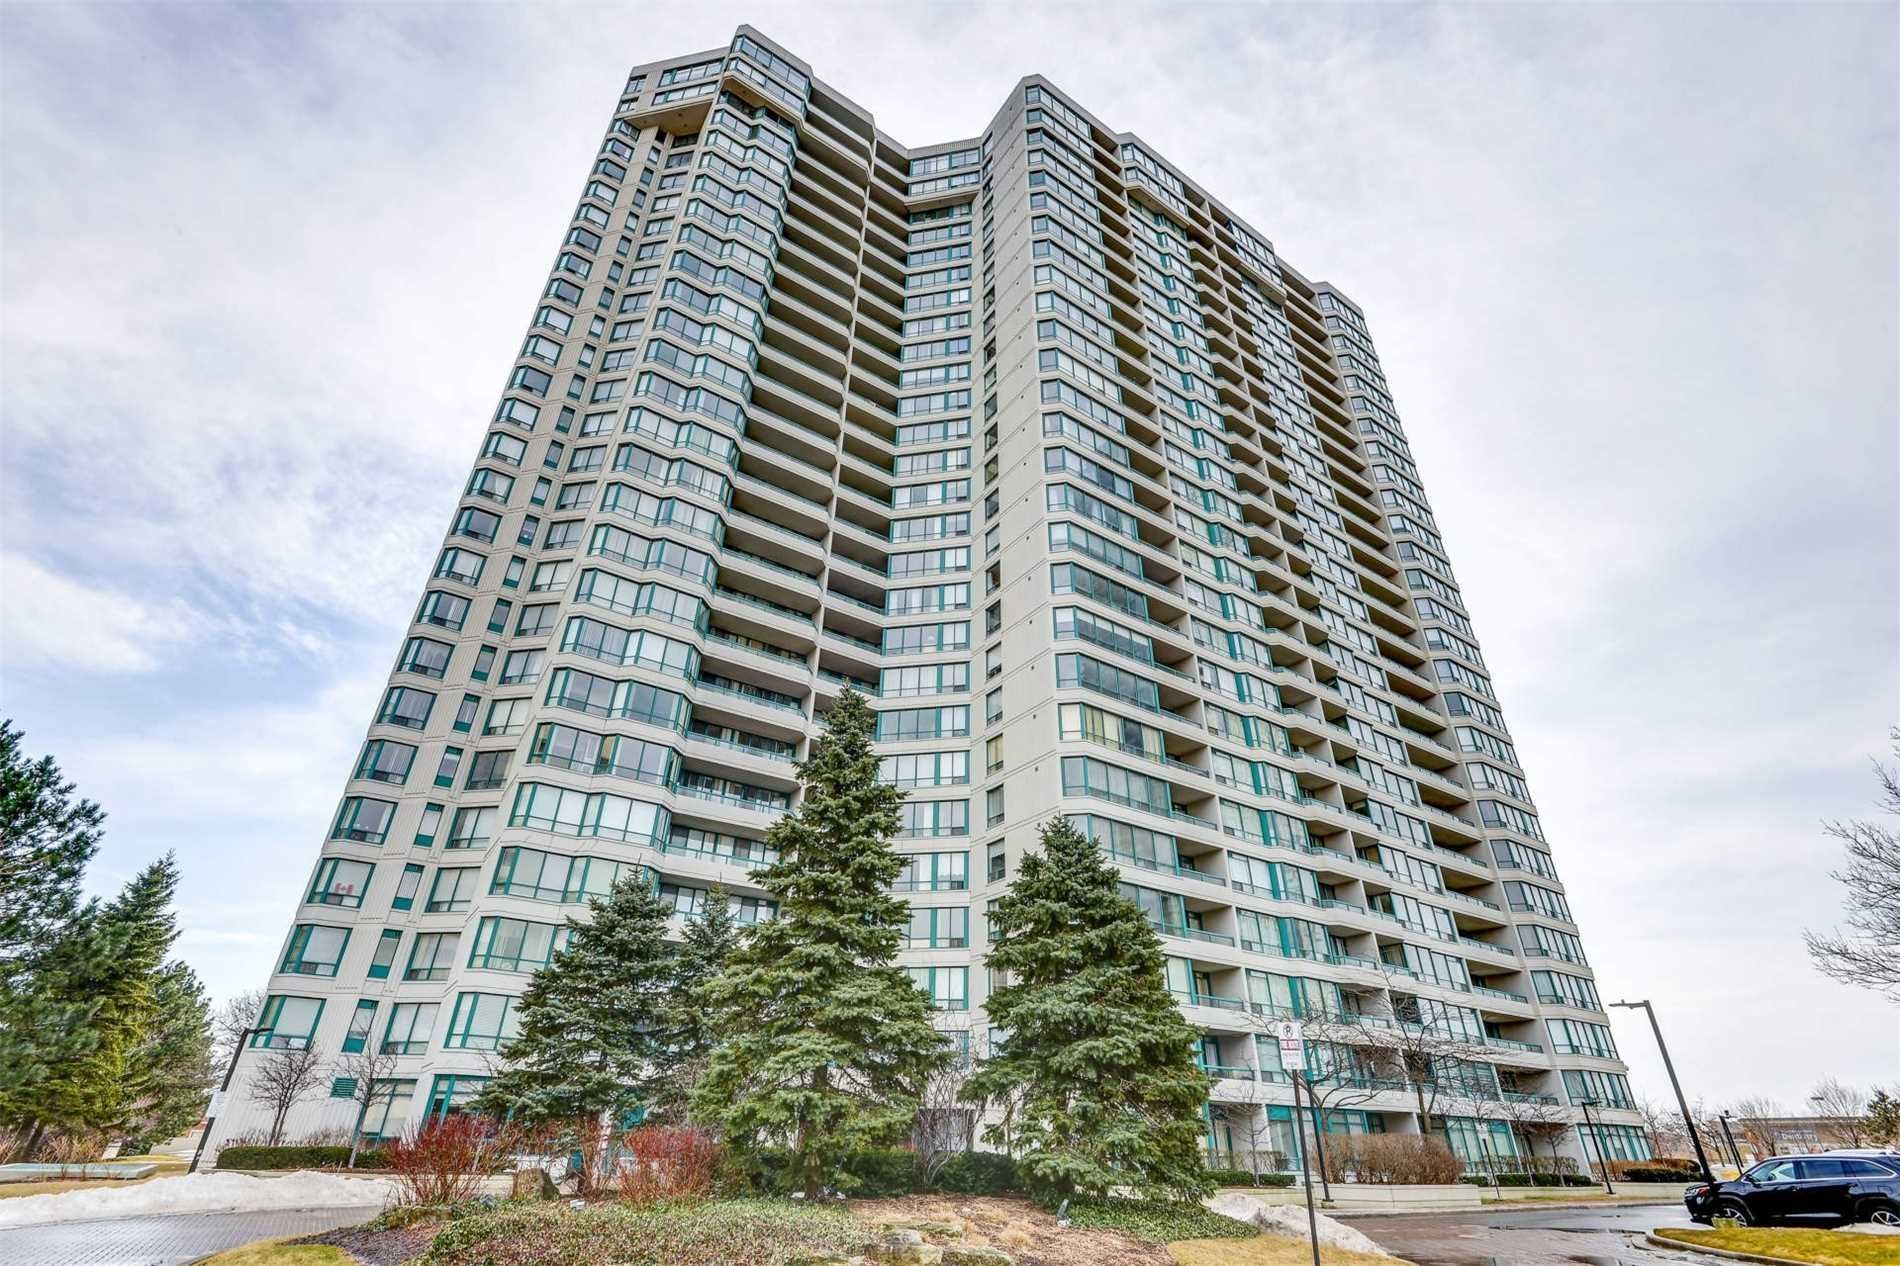 400 Webb Dr. This condo at Centre IV Condos is located in  Mississauga, Toronto - image #2 of 2 by Strata.ca